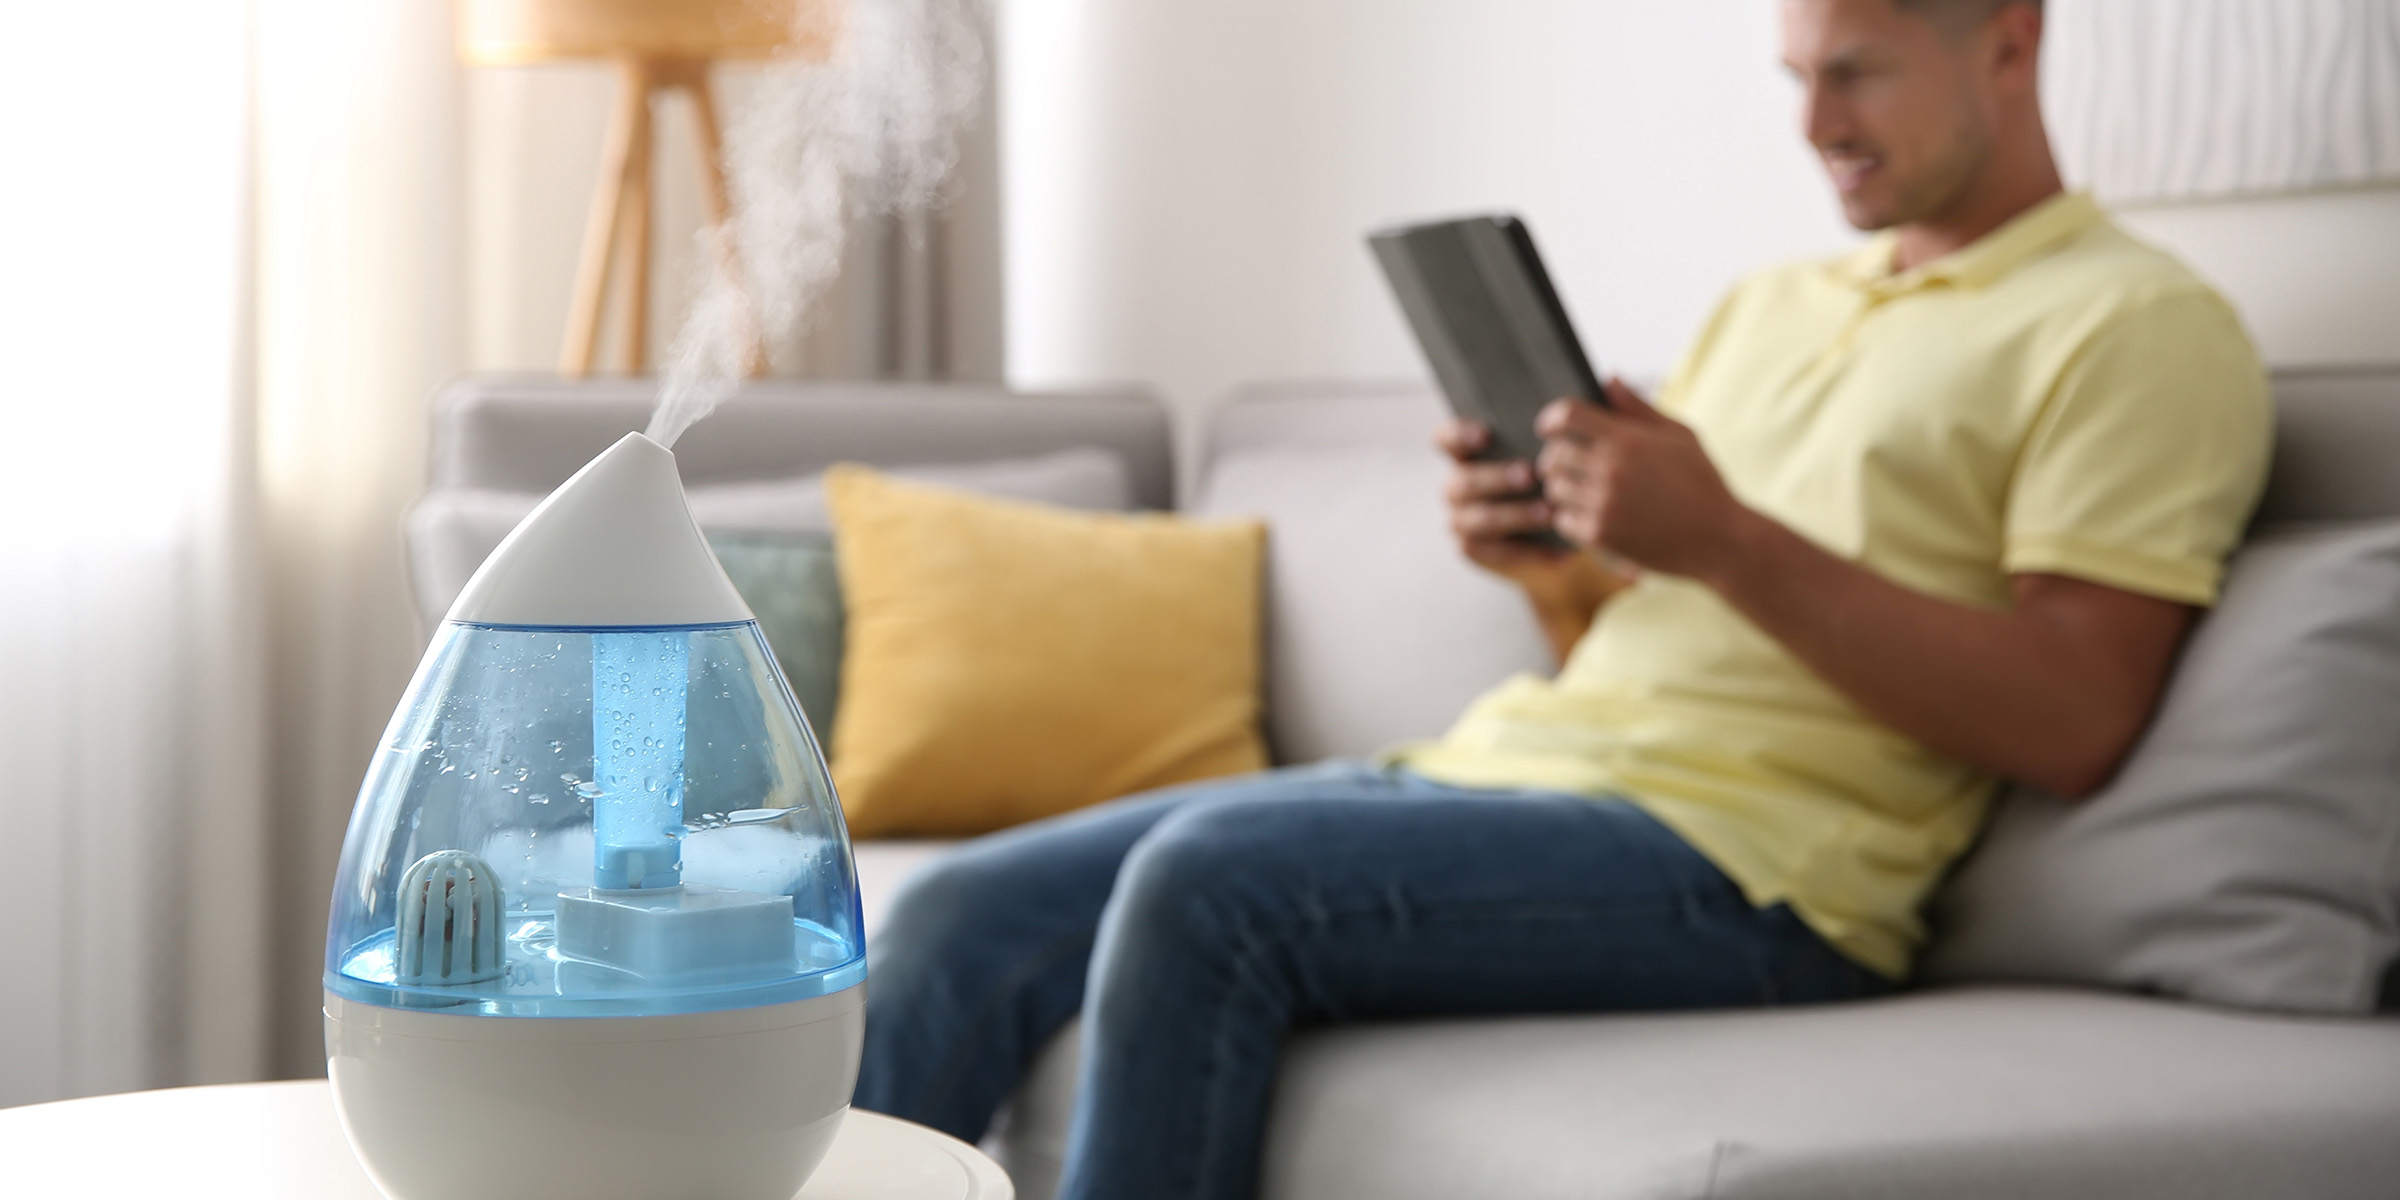 A man sitting on a couch, using a tablet, with a humidifier nearby. Steam Inhalers.